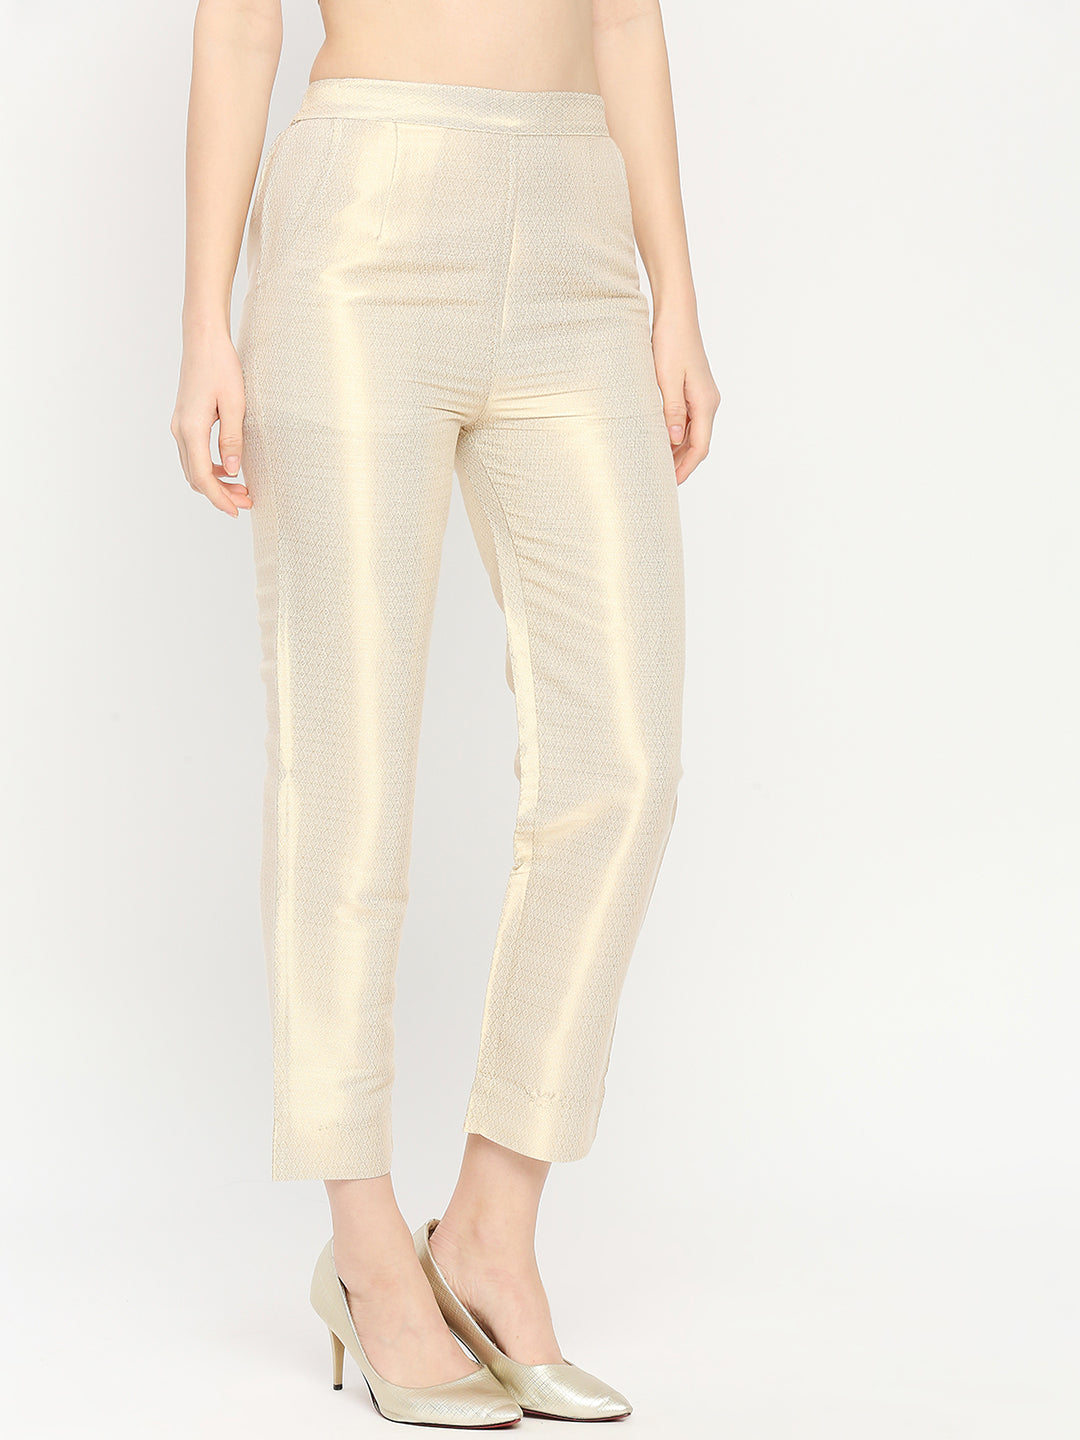 Vegan Leather Cigarette Pants by Cynthia Rowley at ORCHARD MILE